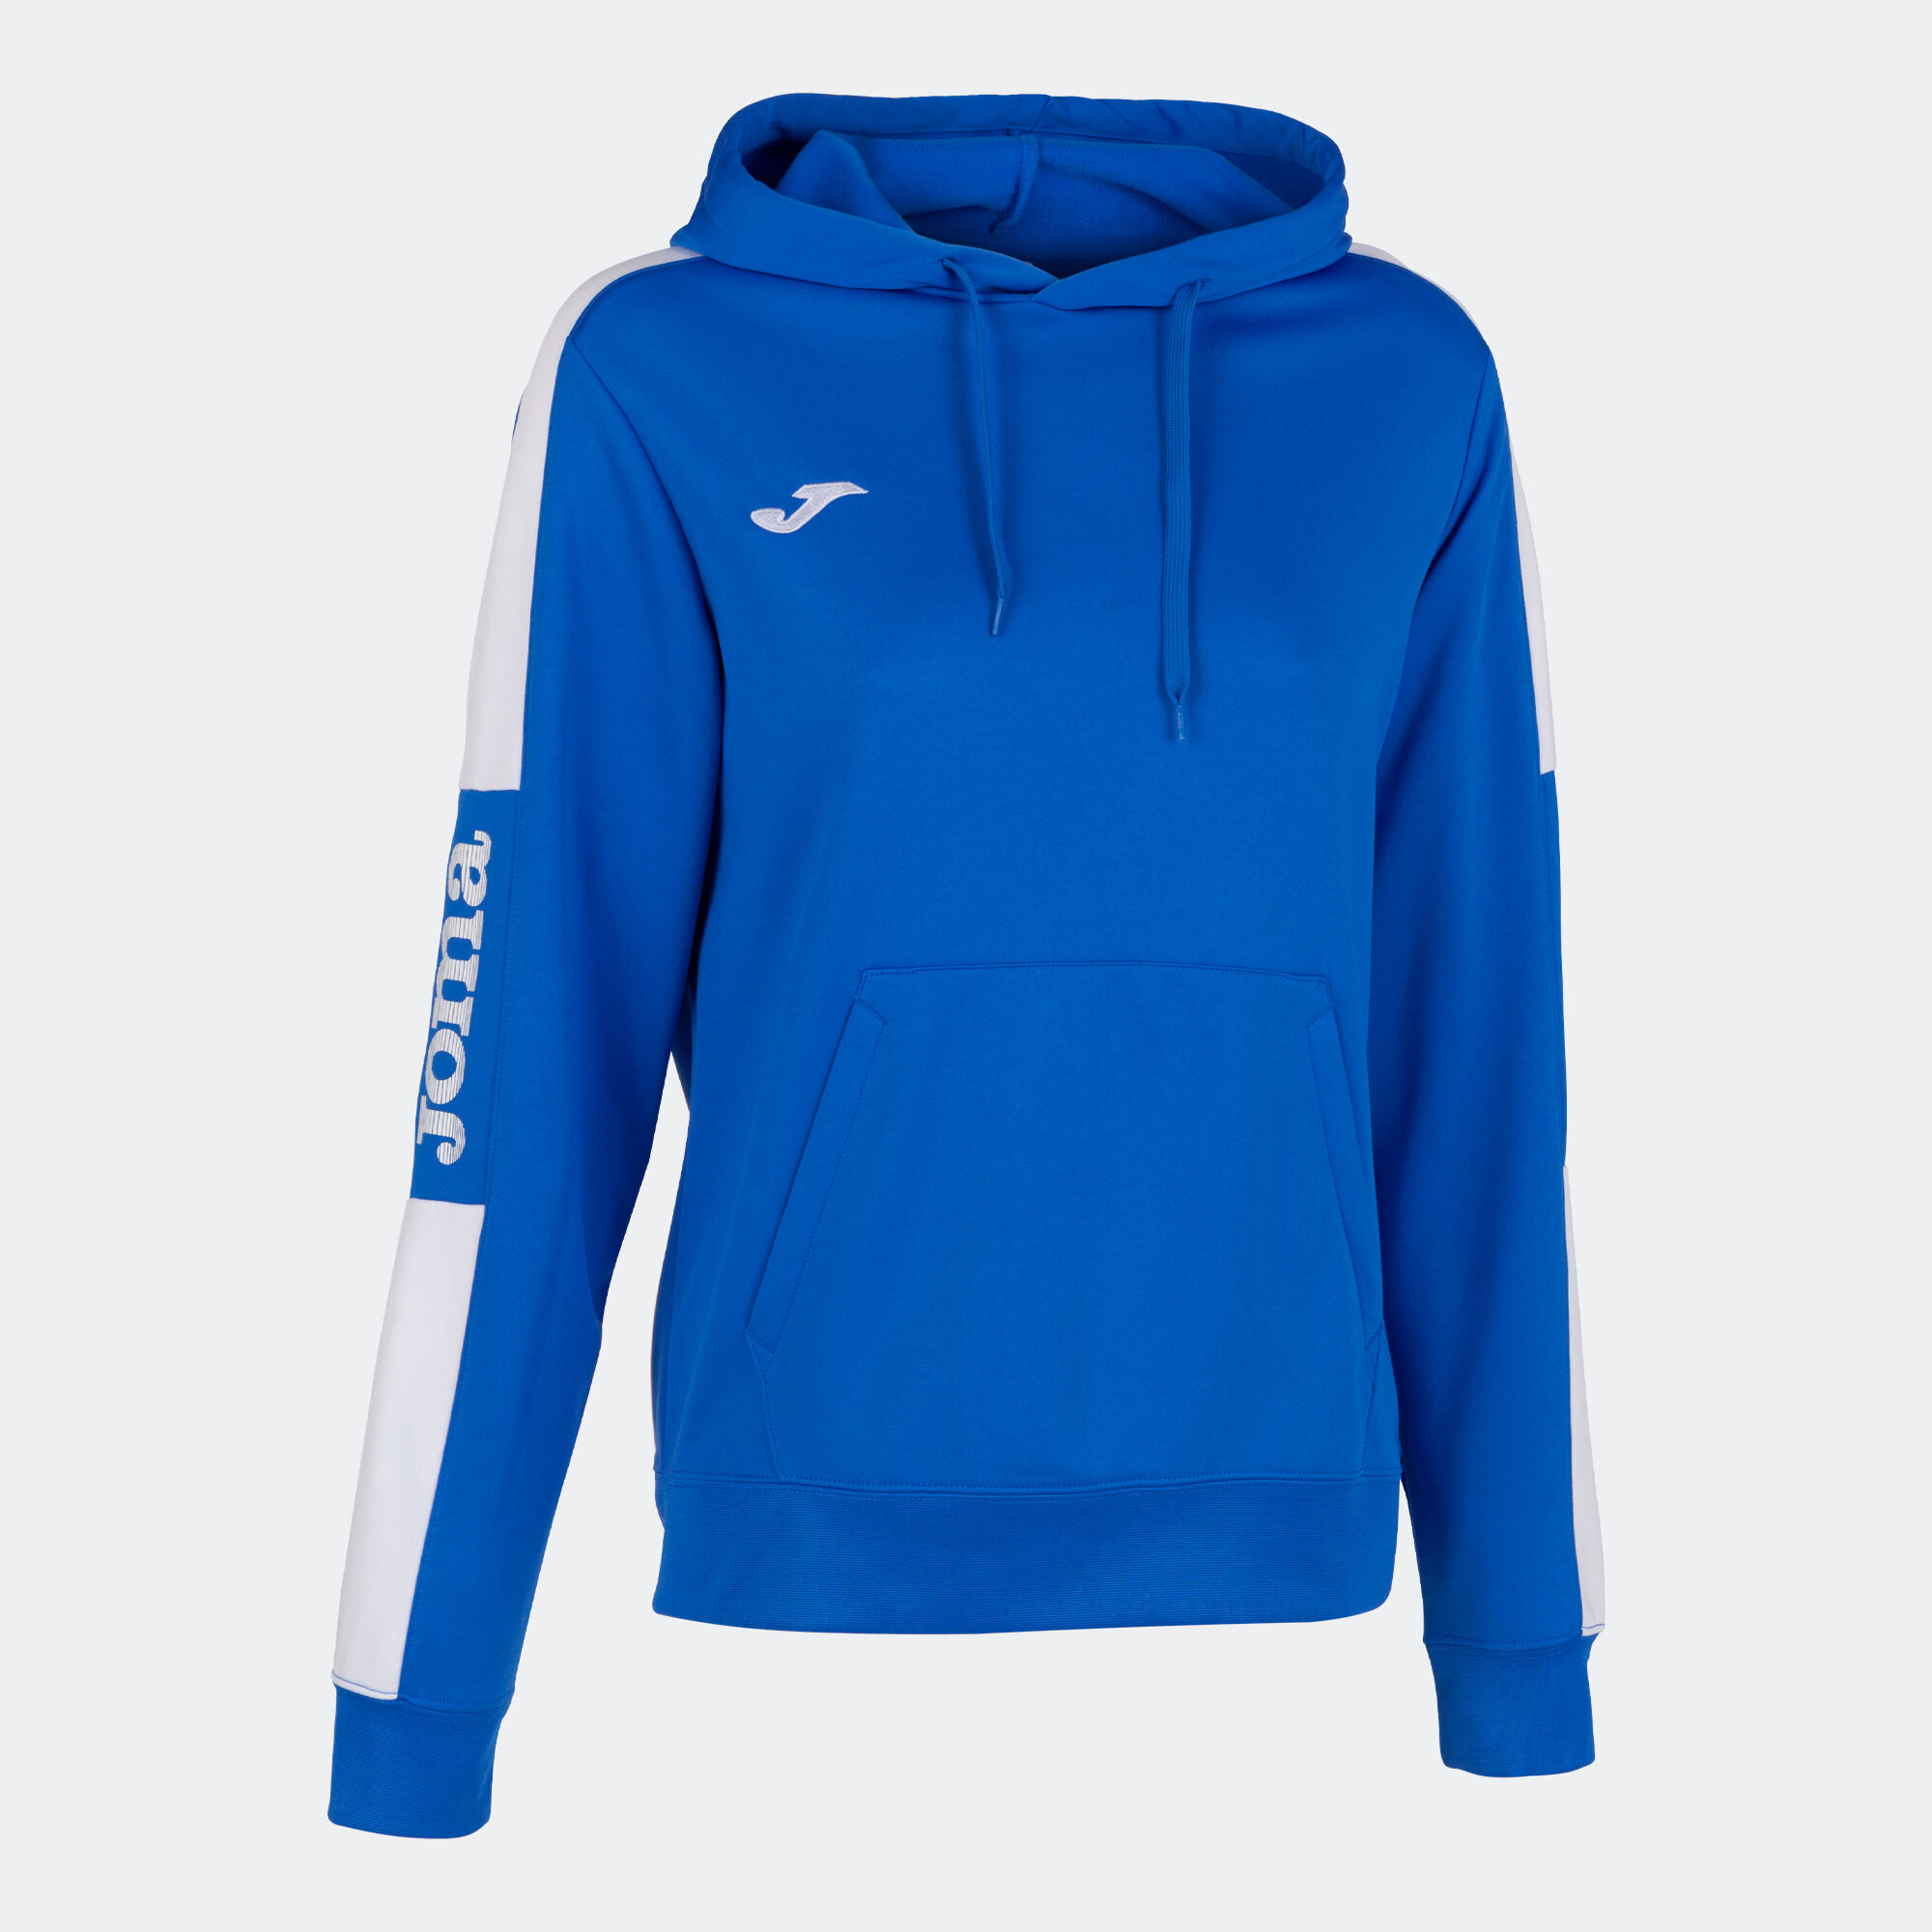 Hooded sweater woman Championship IV royal blue white